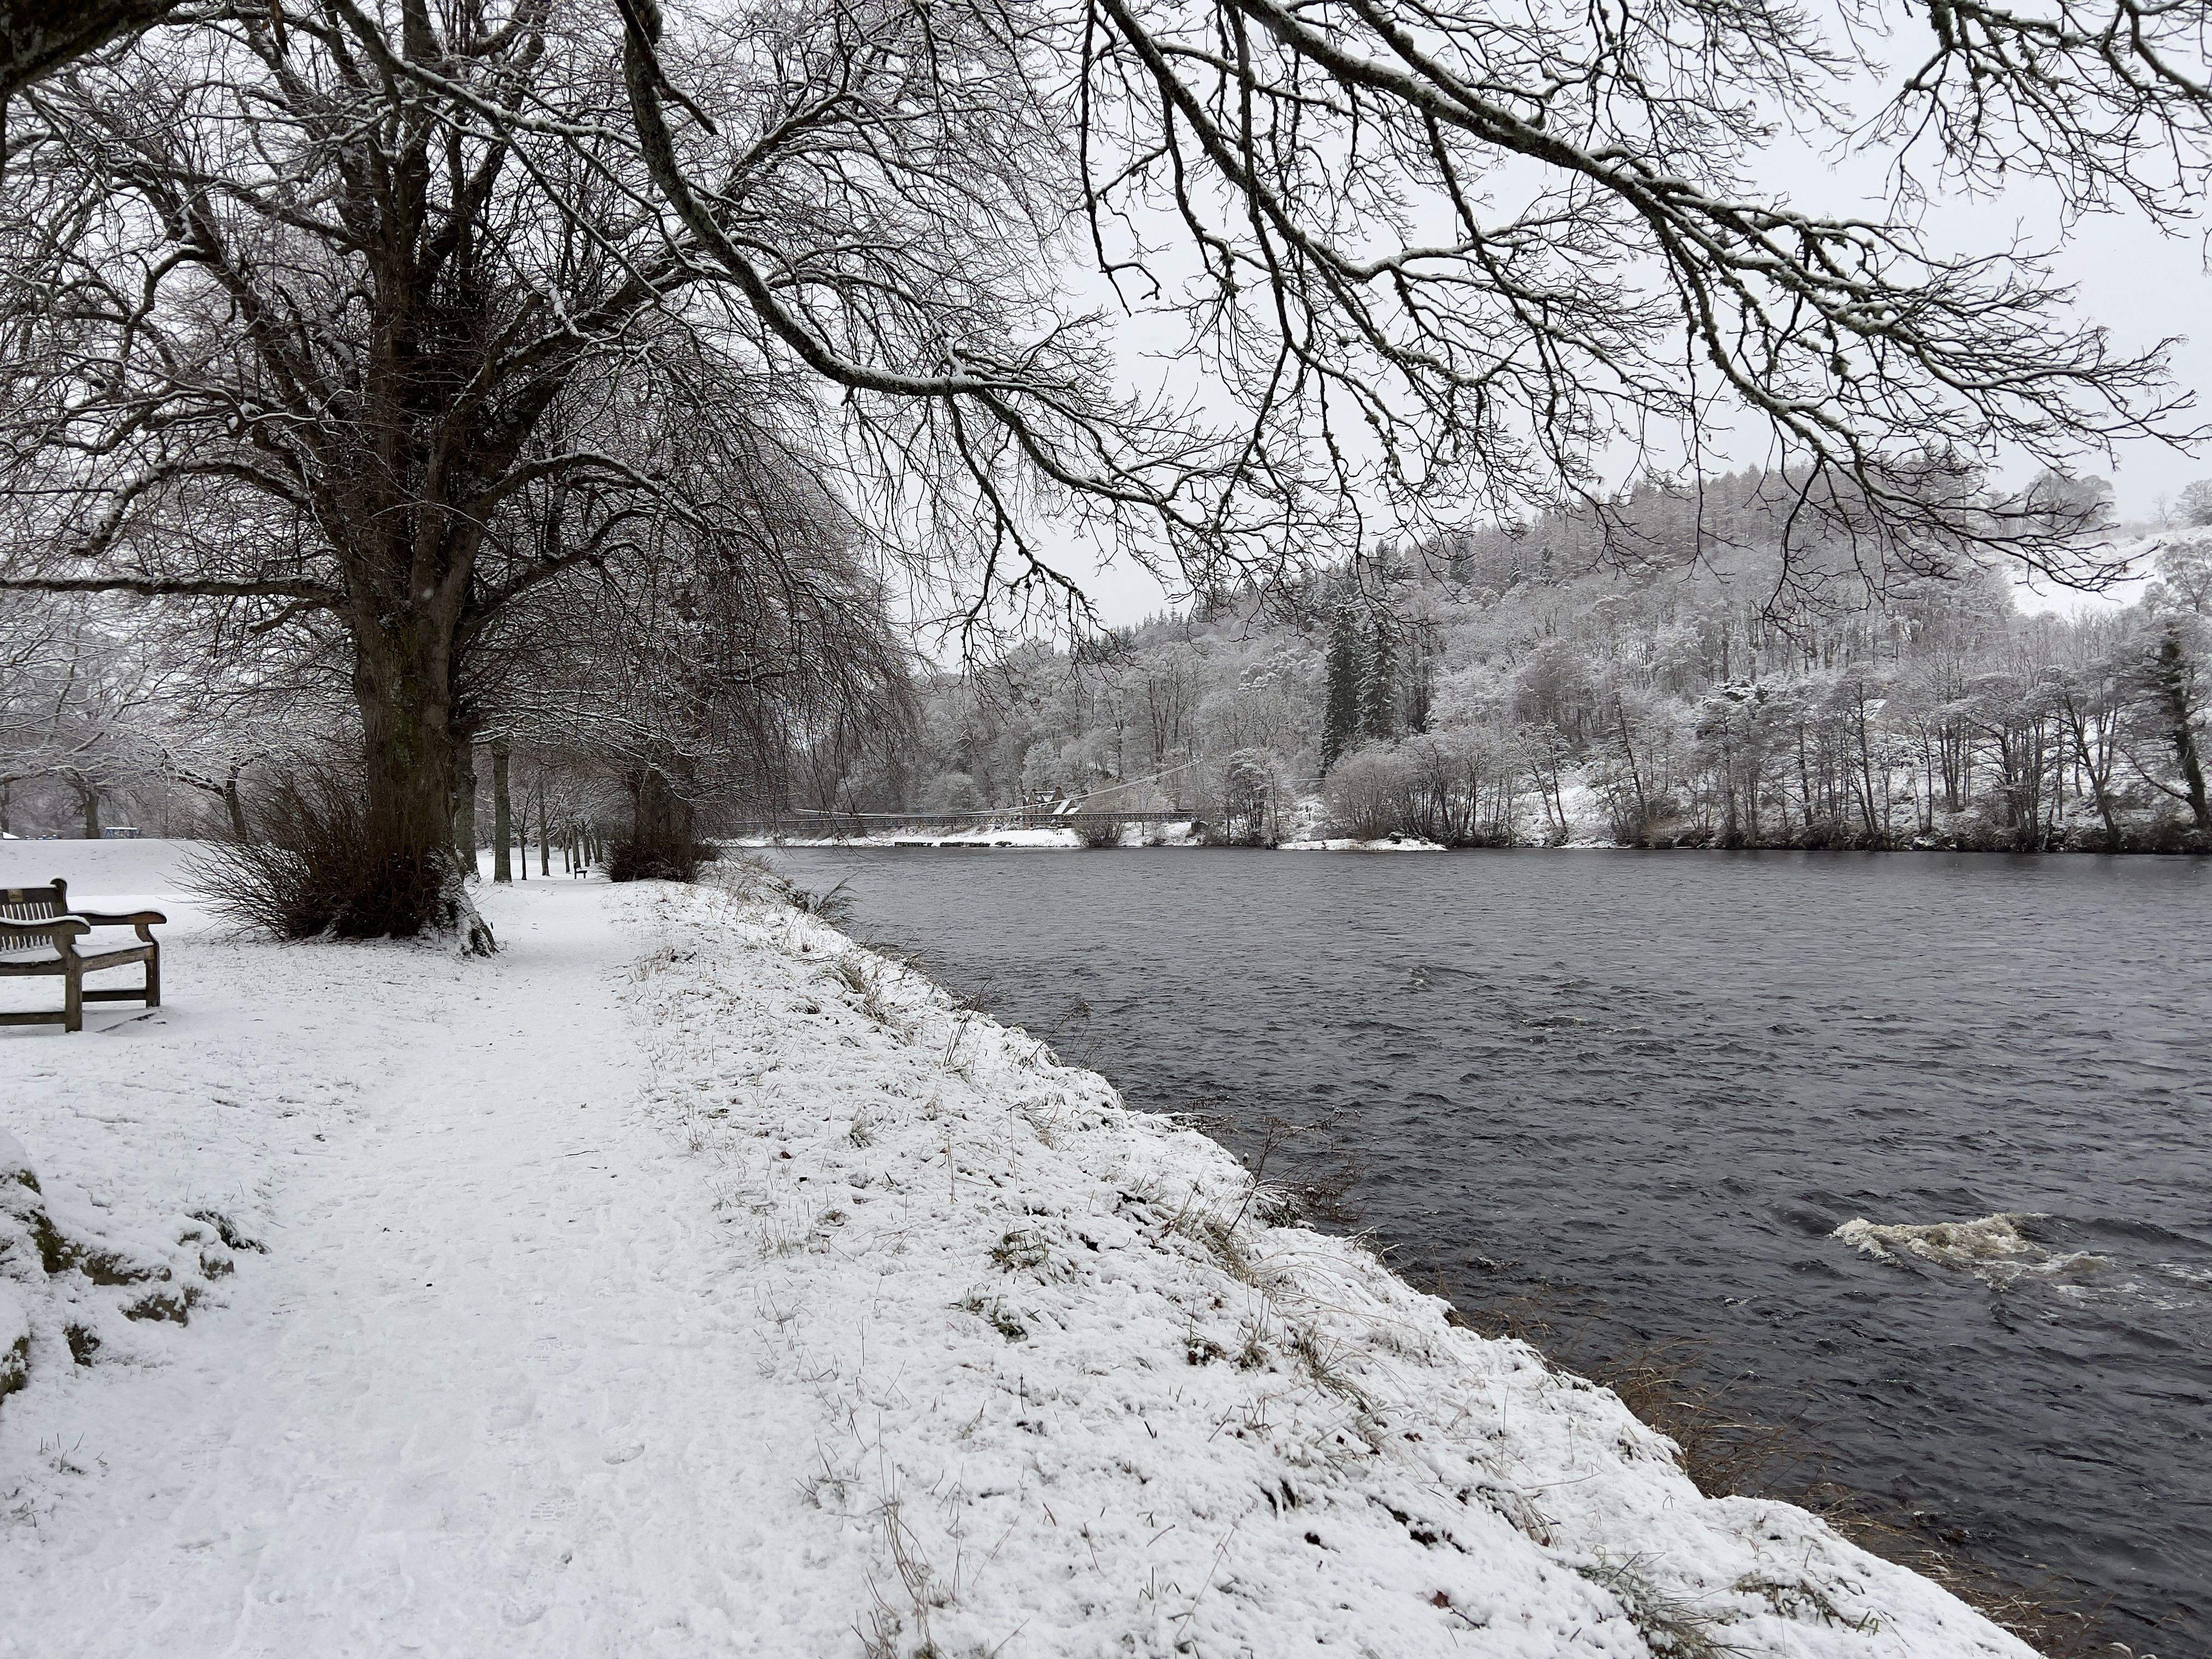 A snowy walk by the river